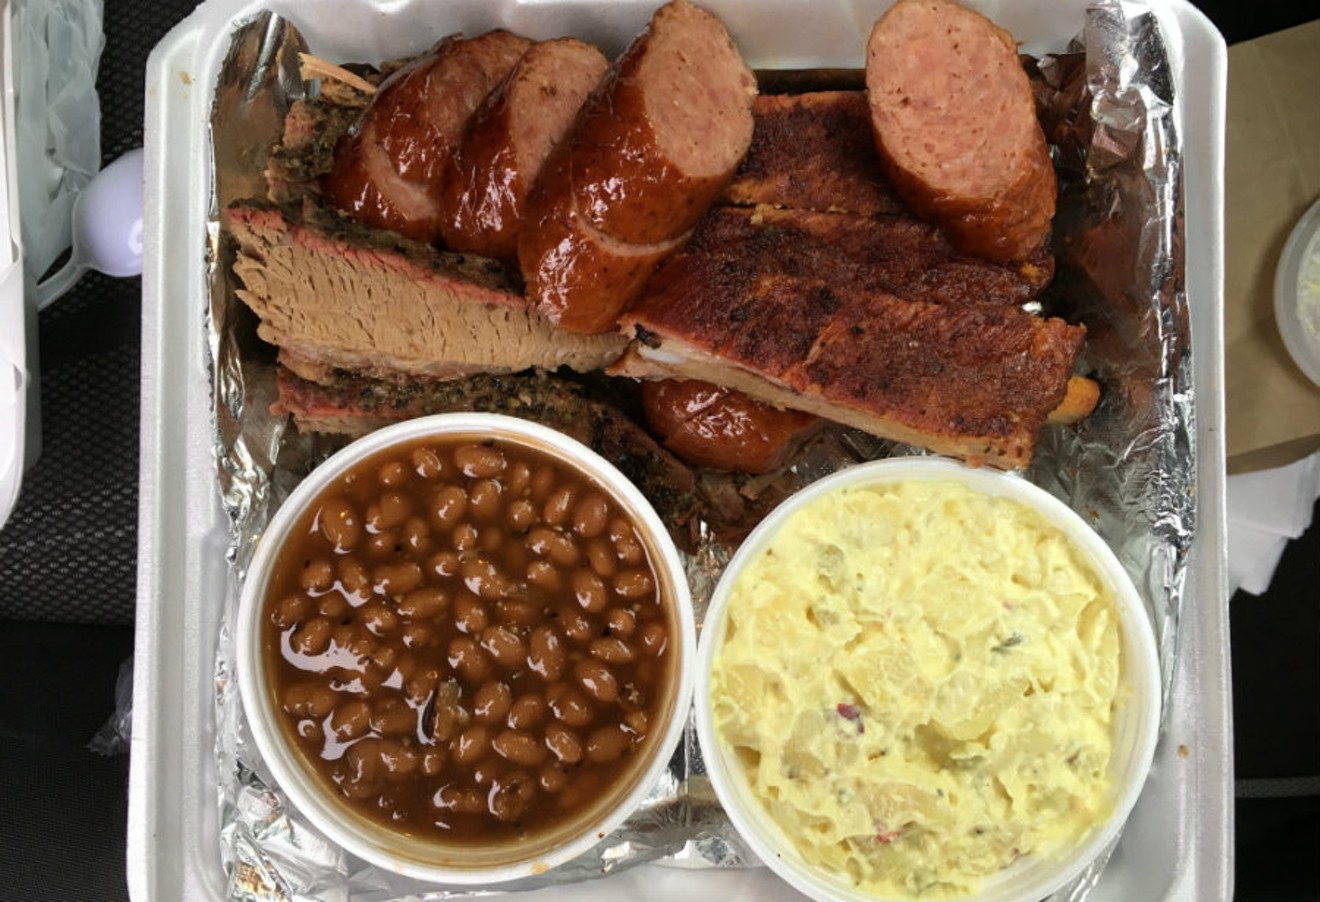 A three-meat plate runs you $15, a steal in today's barbecue market.